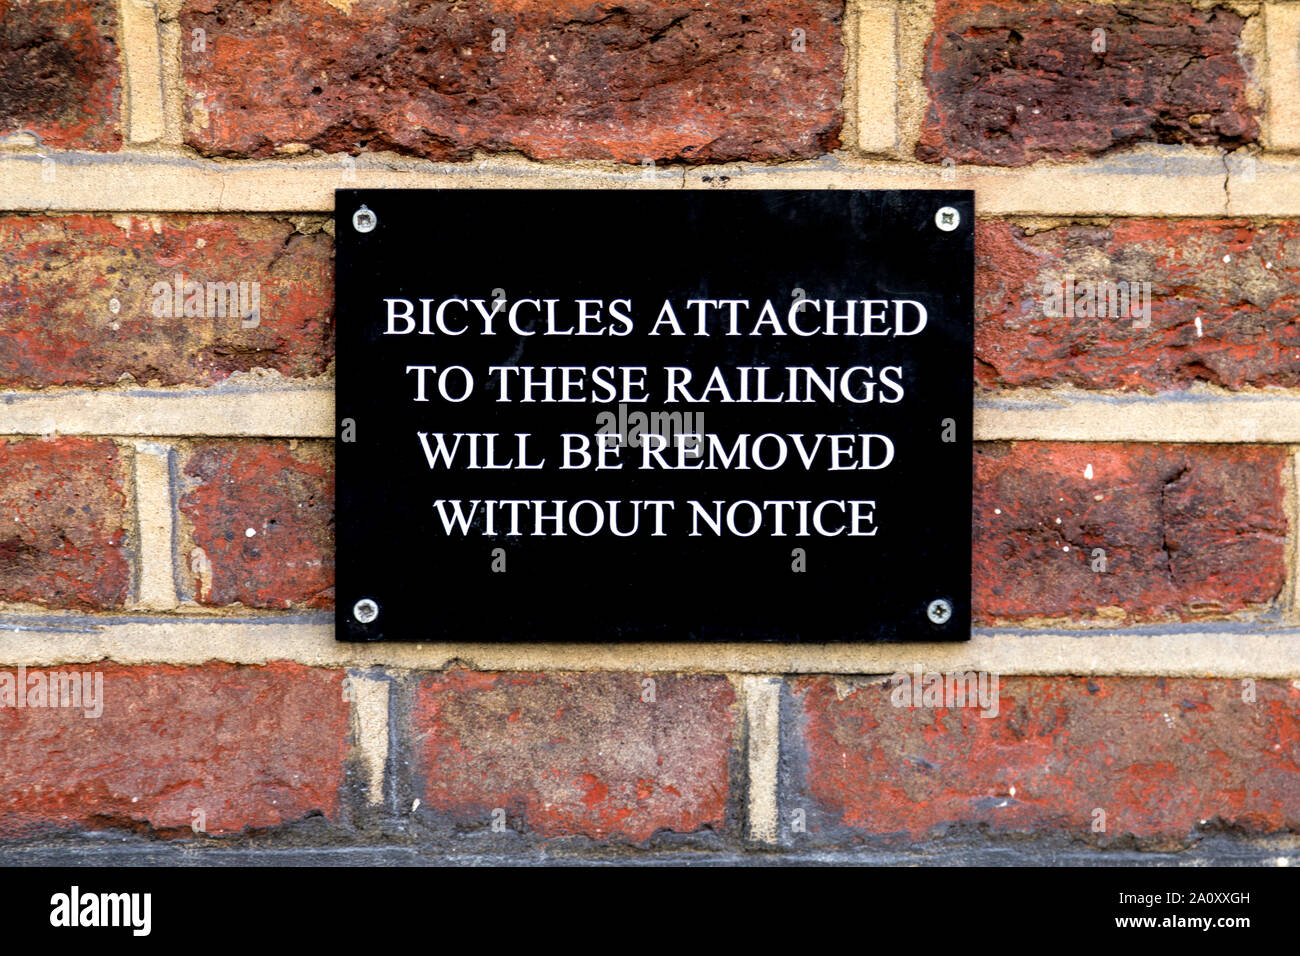 'Bicycles attached to these railings will be removed without notice' sign on a brick wall Stock Photo